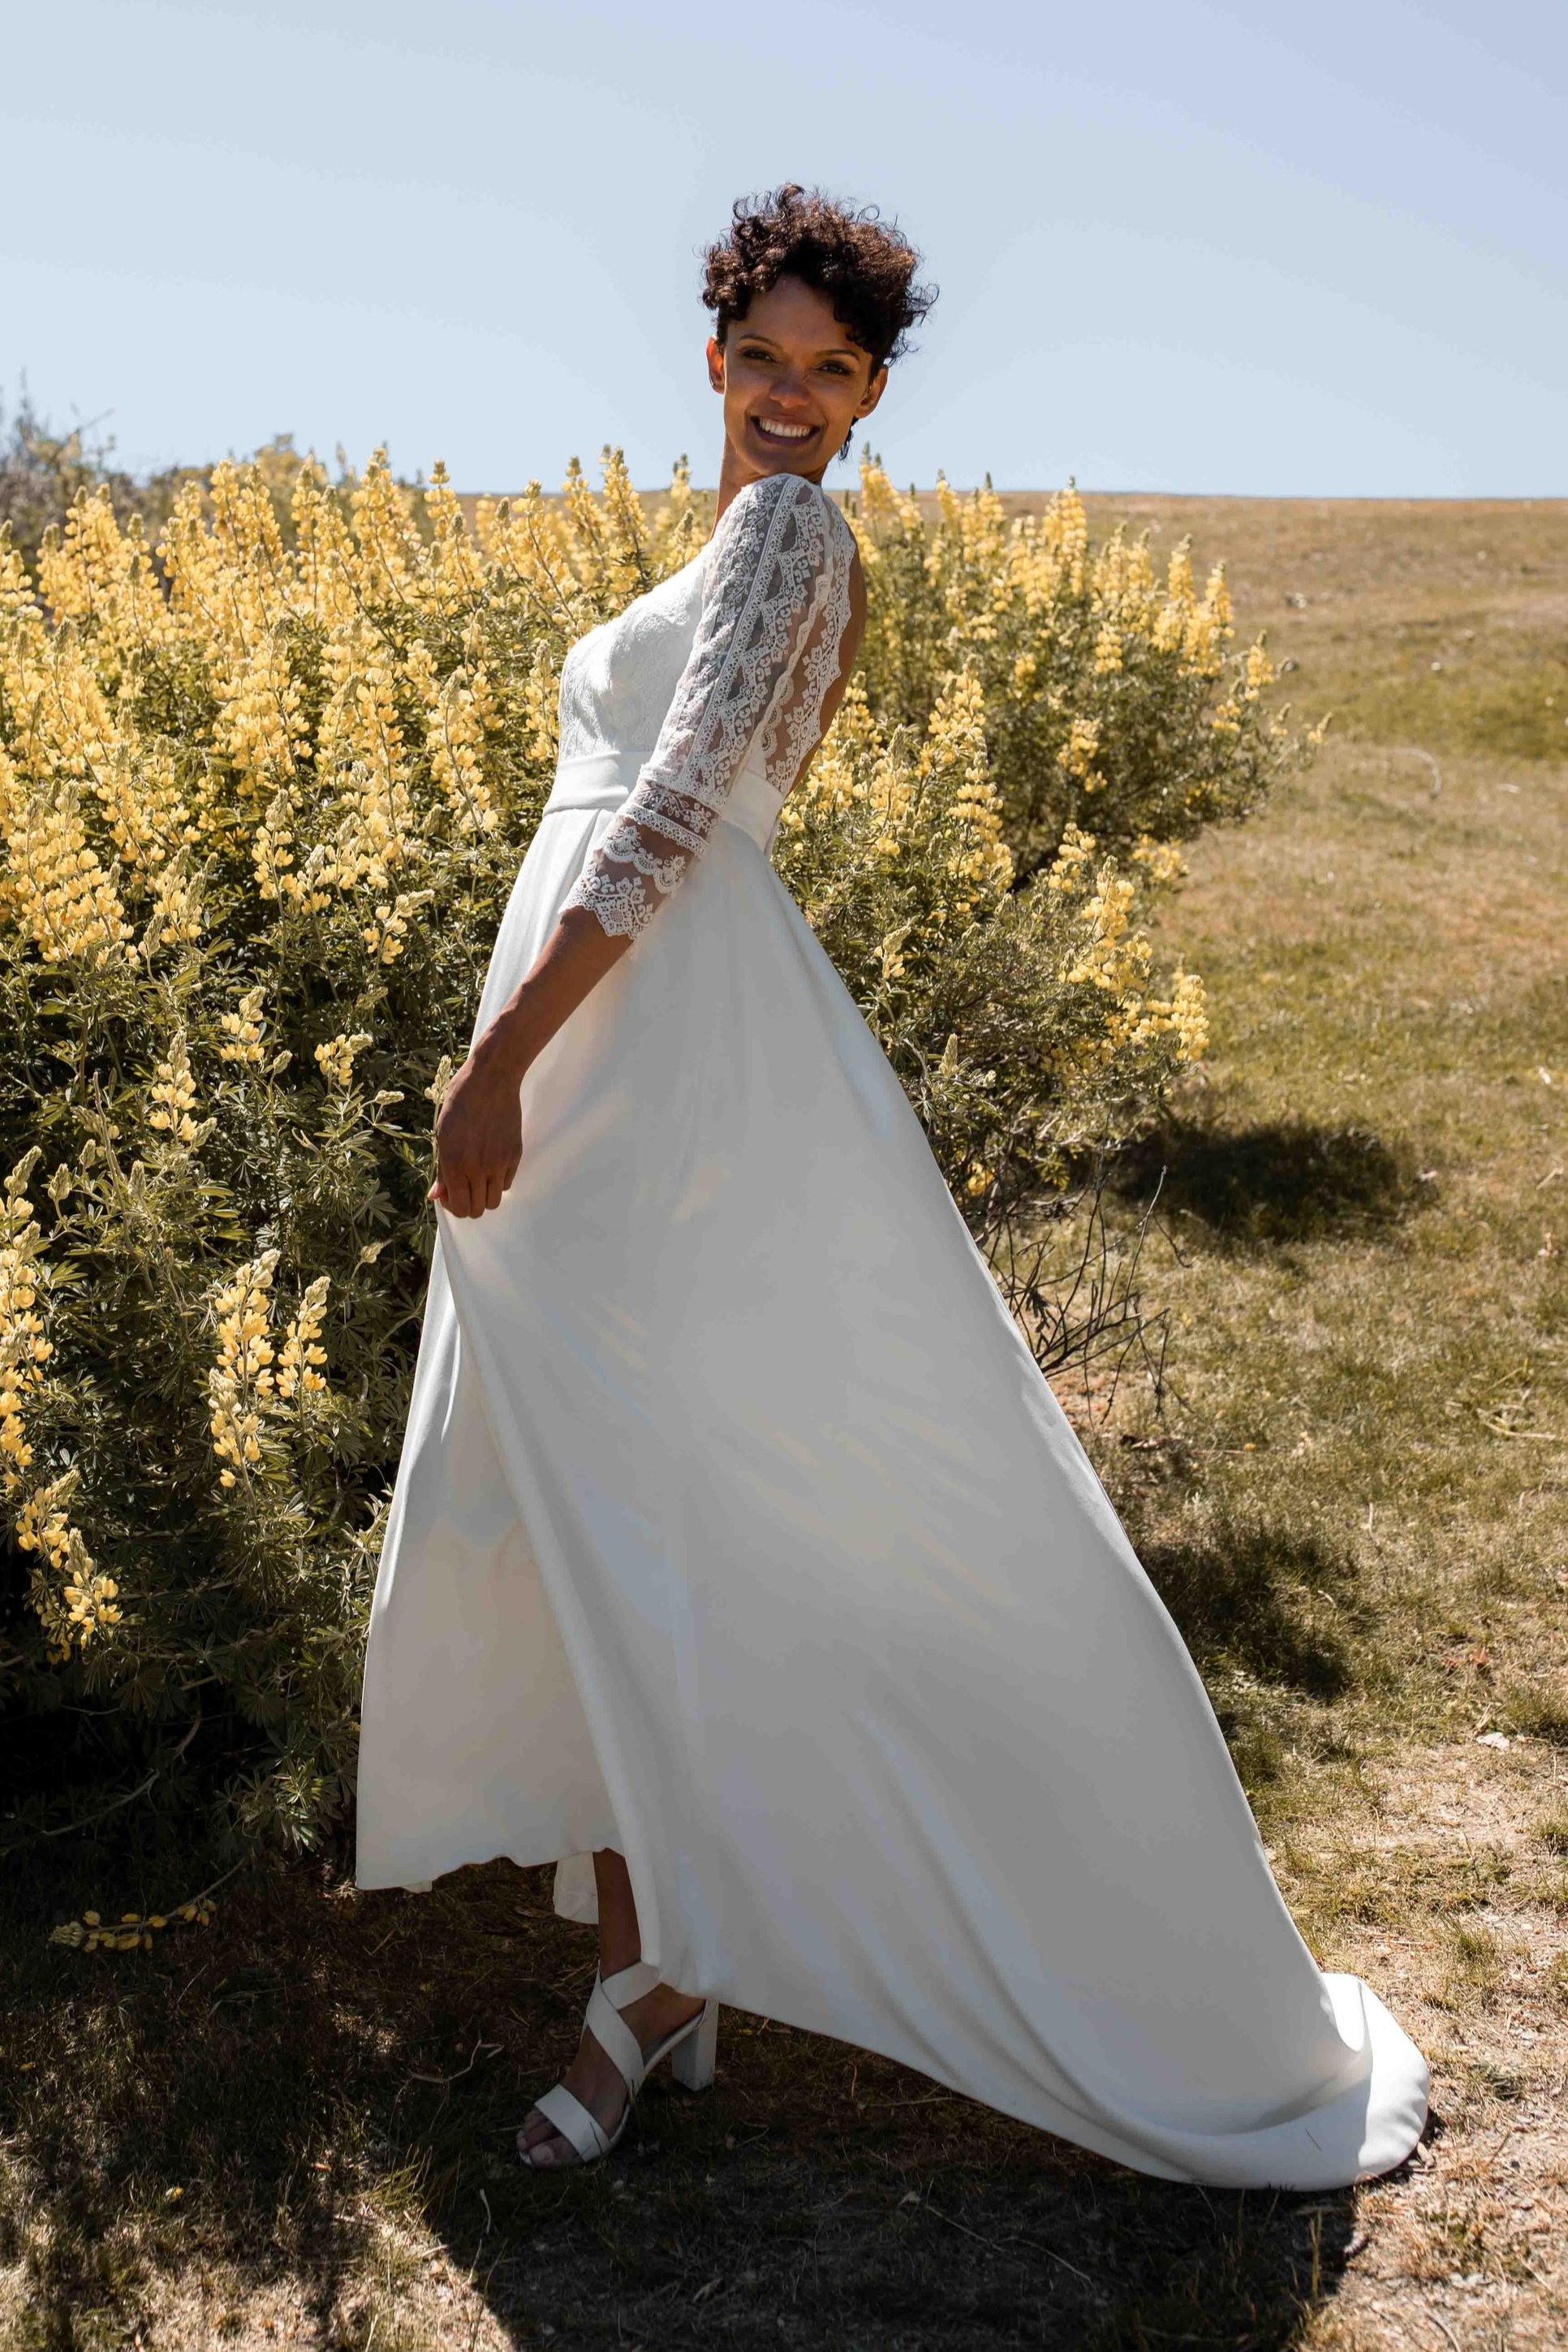 Jenny+Dress+-+Nemo+Bridal+Couture+Queenstown+New+Zealand+0V9A4270.jpg